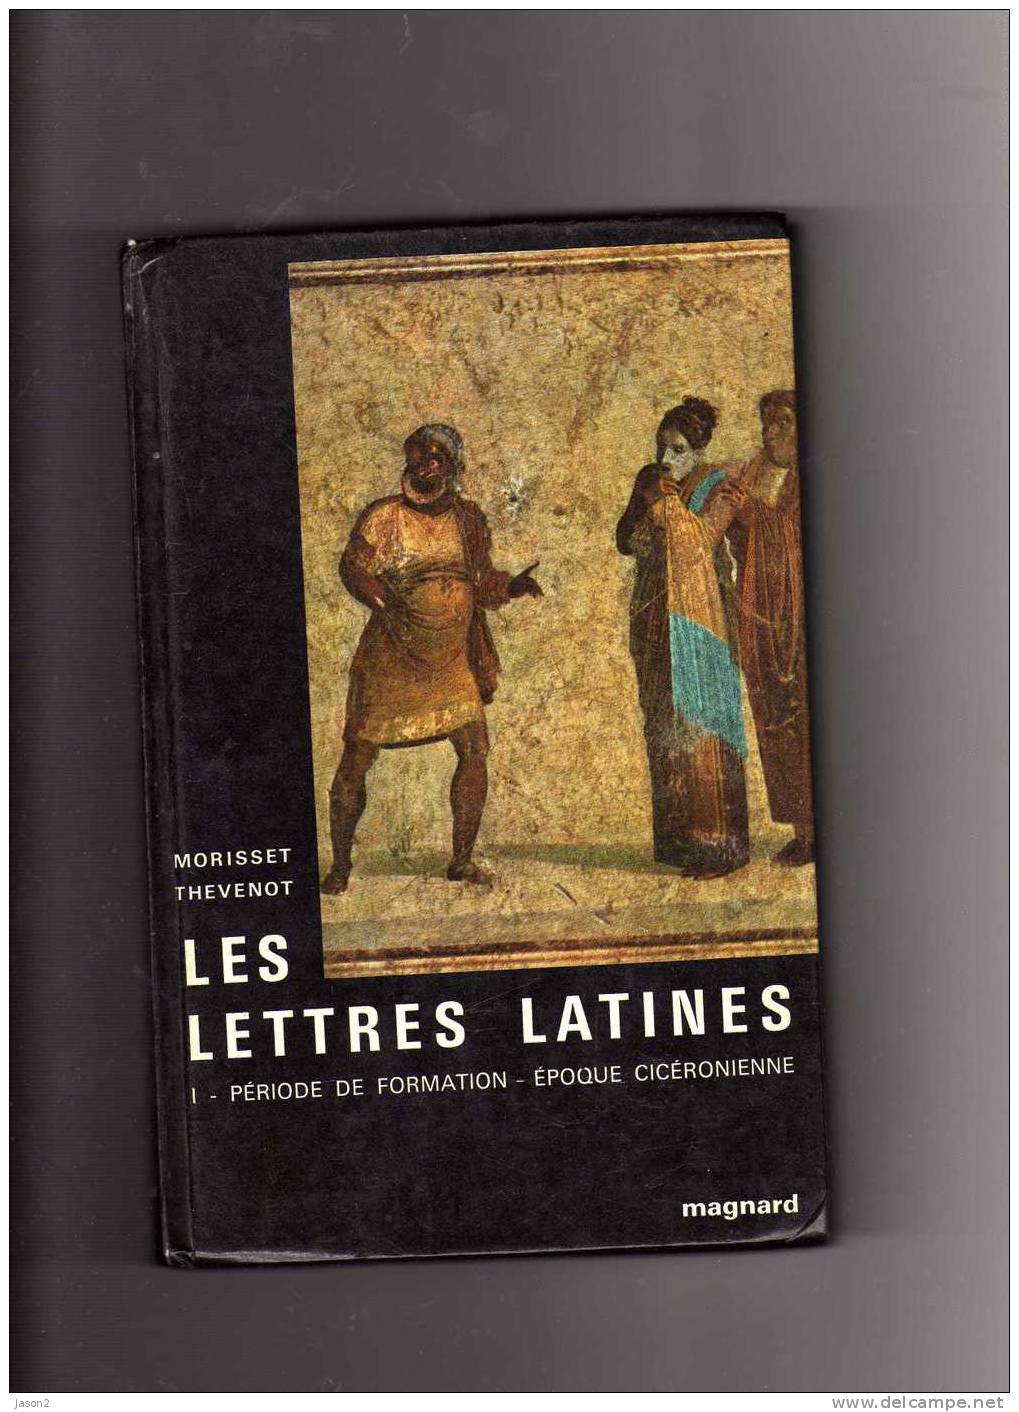 LES LETTRES LATINES Morisset Thevennot 1980 - 18+ Years Old